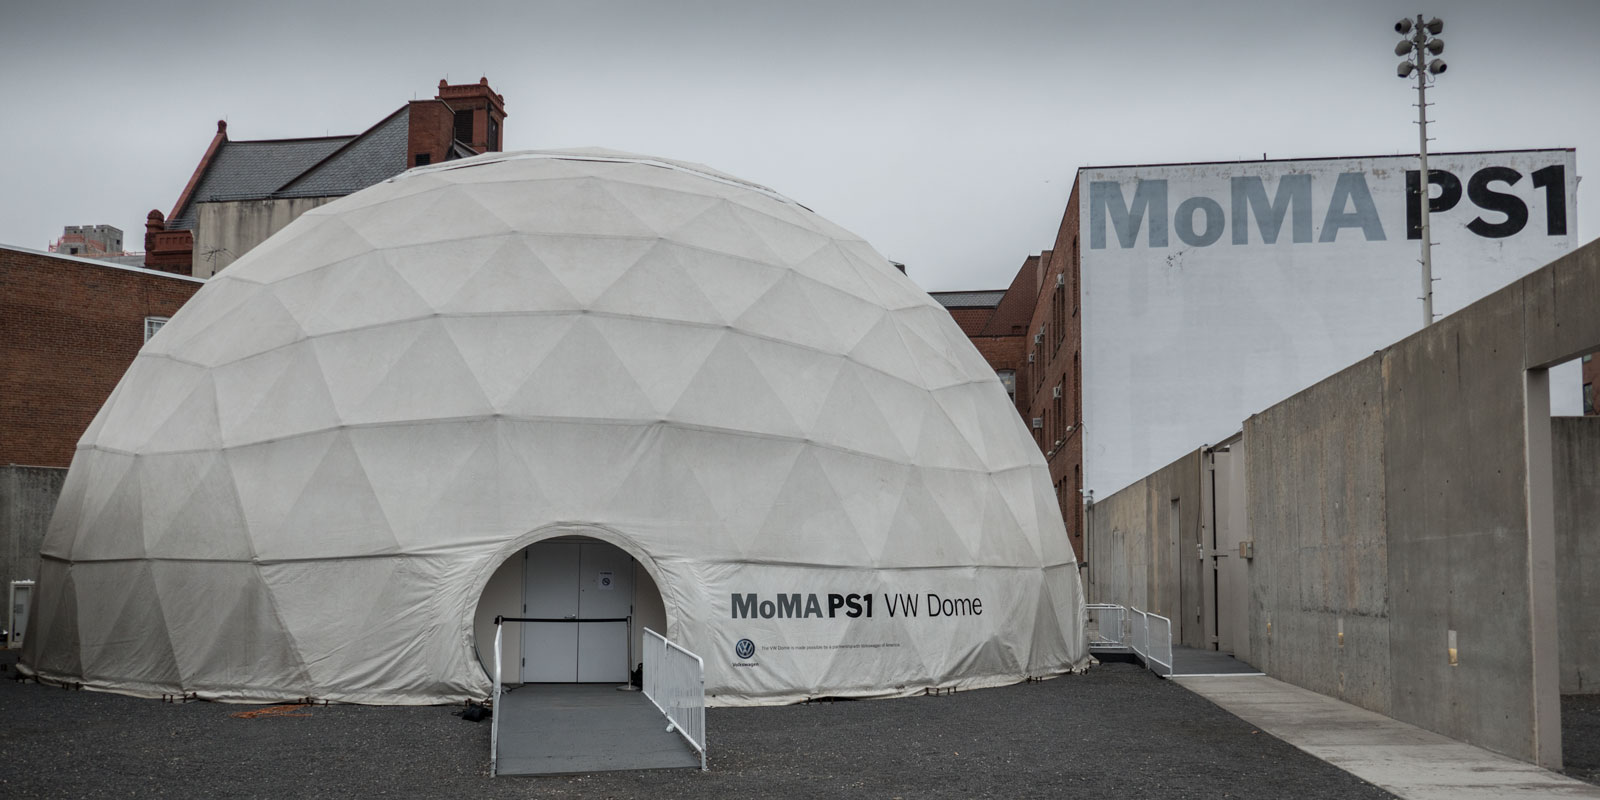 MOMA PS1 Long Island City Queens NYC